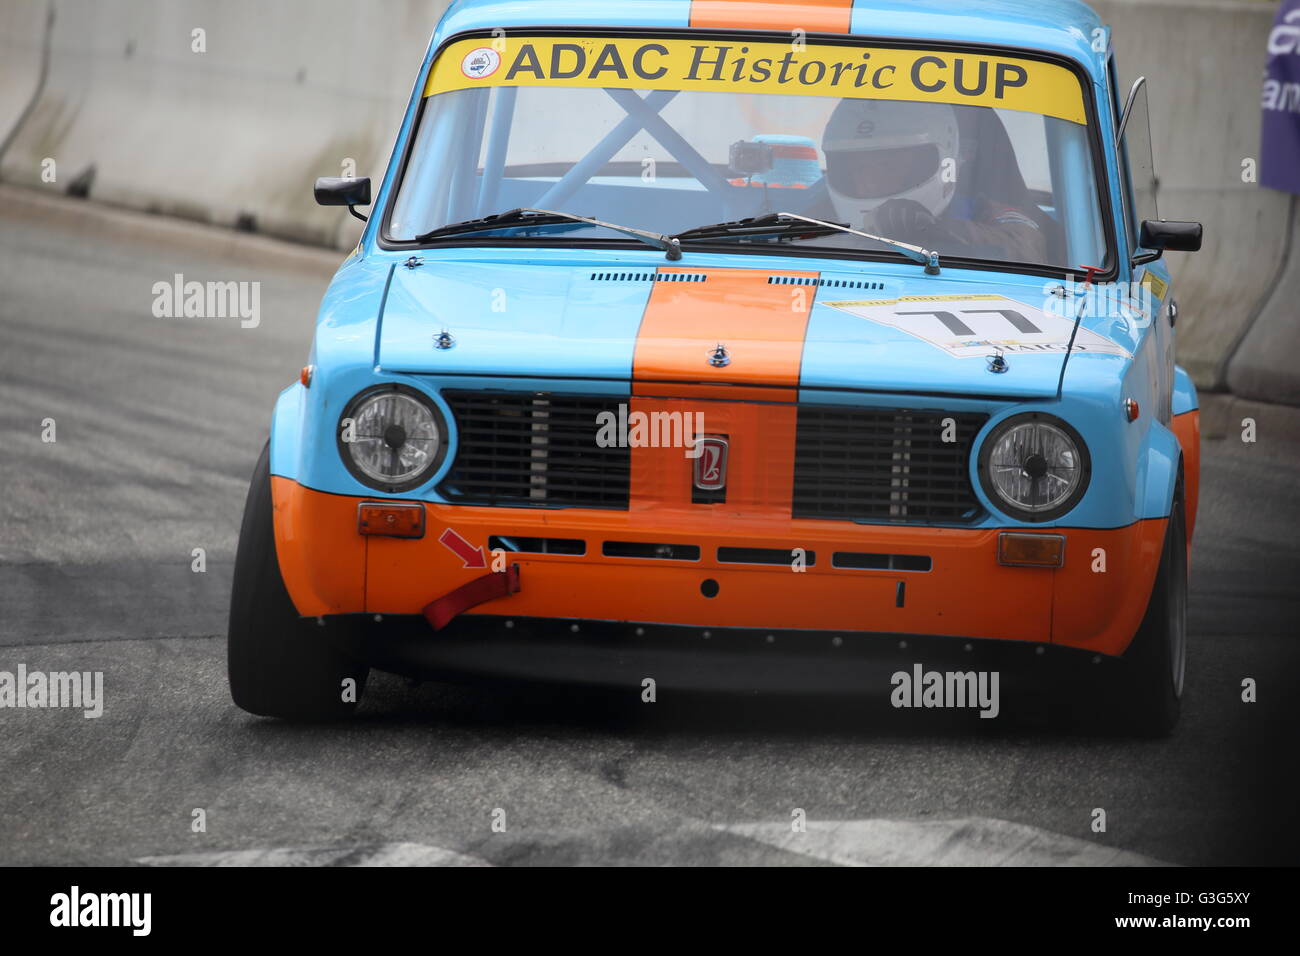 A Lada 2101 being raced at the classic car racing event Classic Race Aarhus in May 2016 Stock Photo